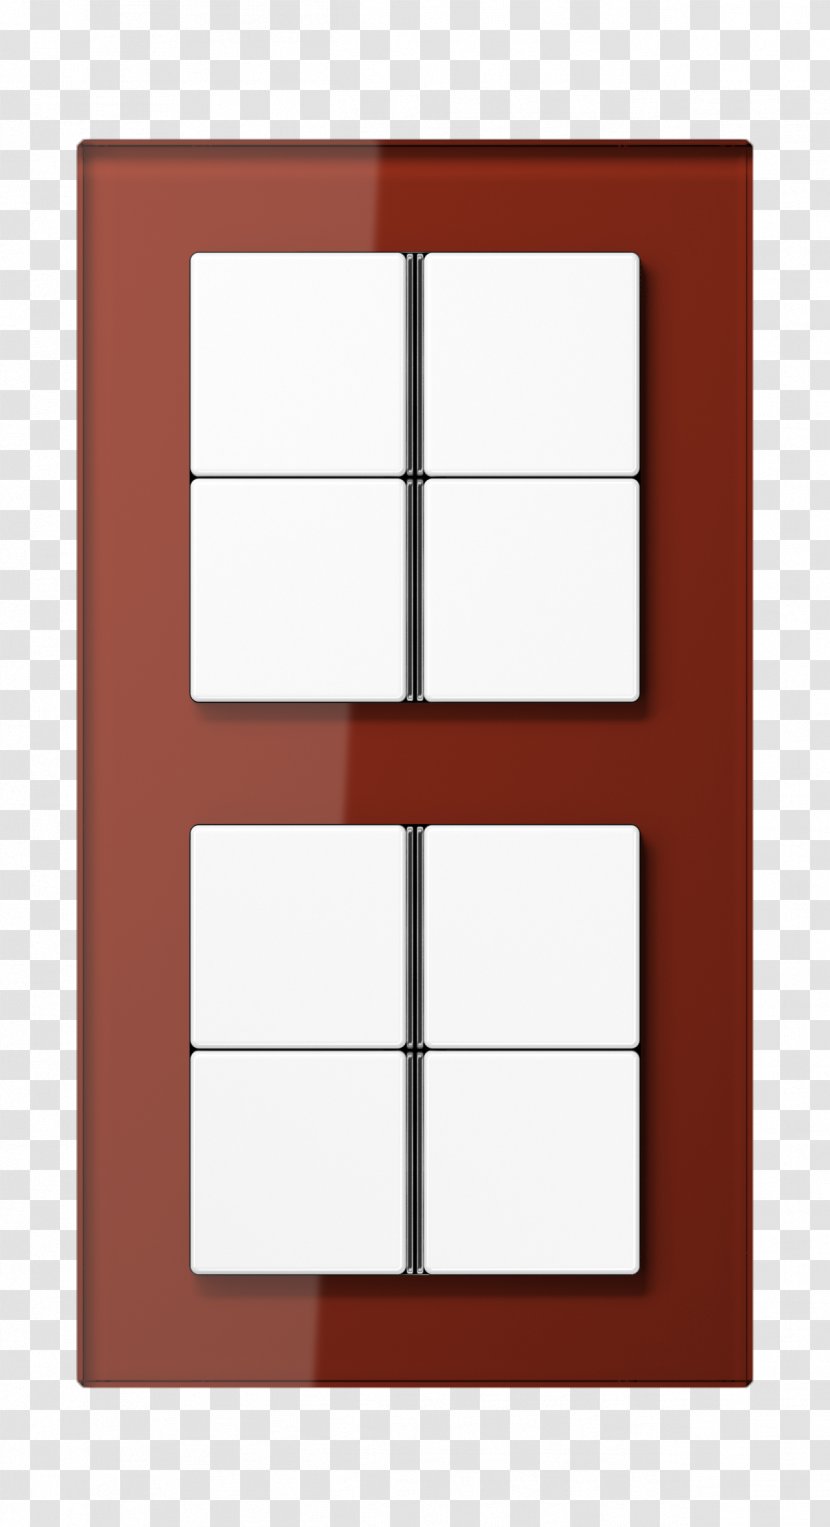 Window Glass Air Conditioning Picture Frames Pattern - Button Design Transparent PNG